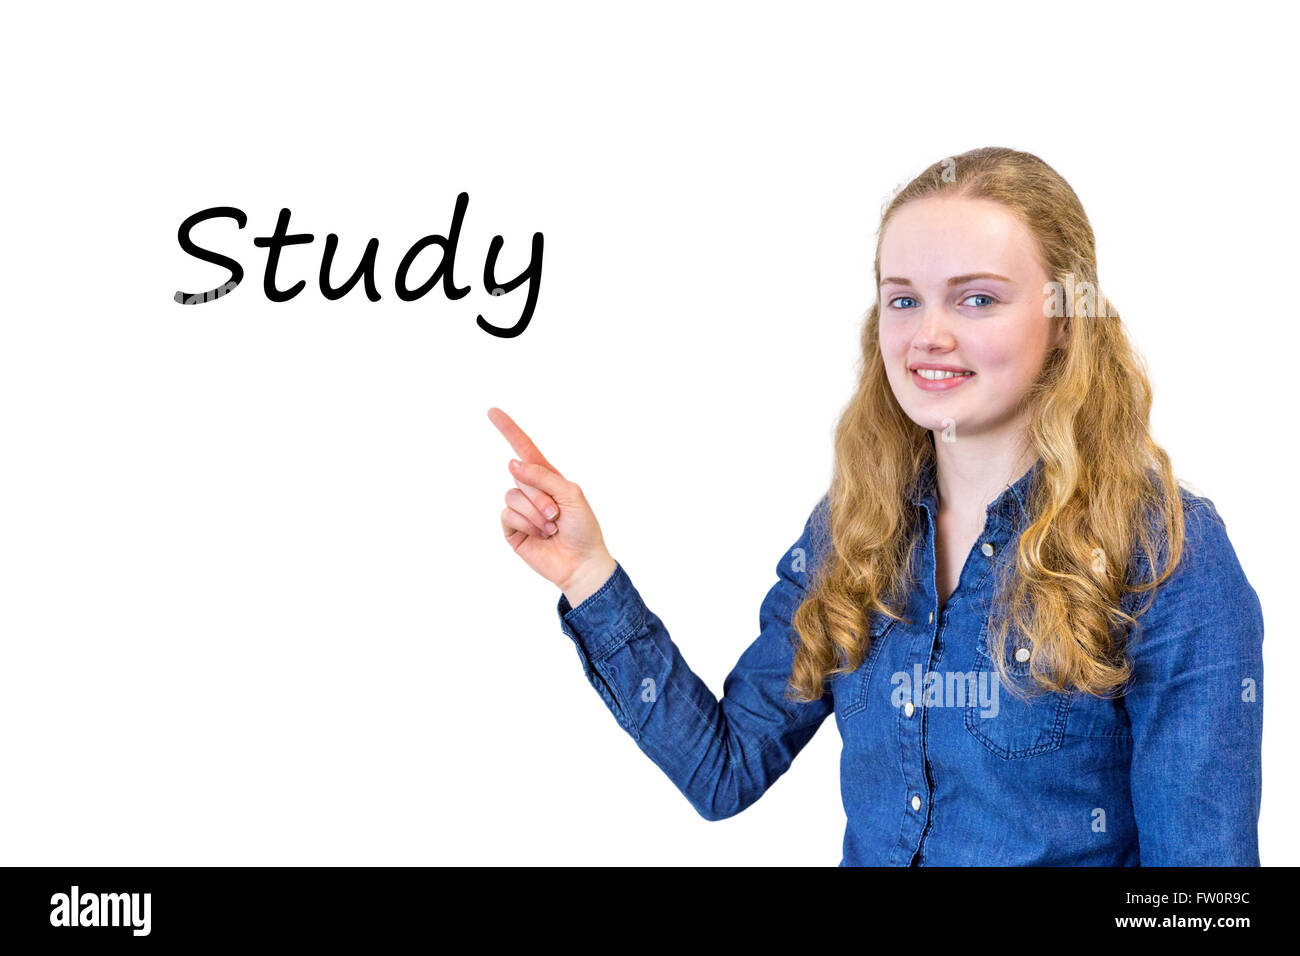 Caucasian female student pointing at word Study on white board Stock Photo